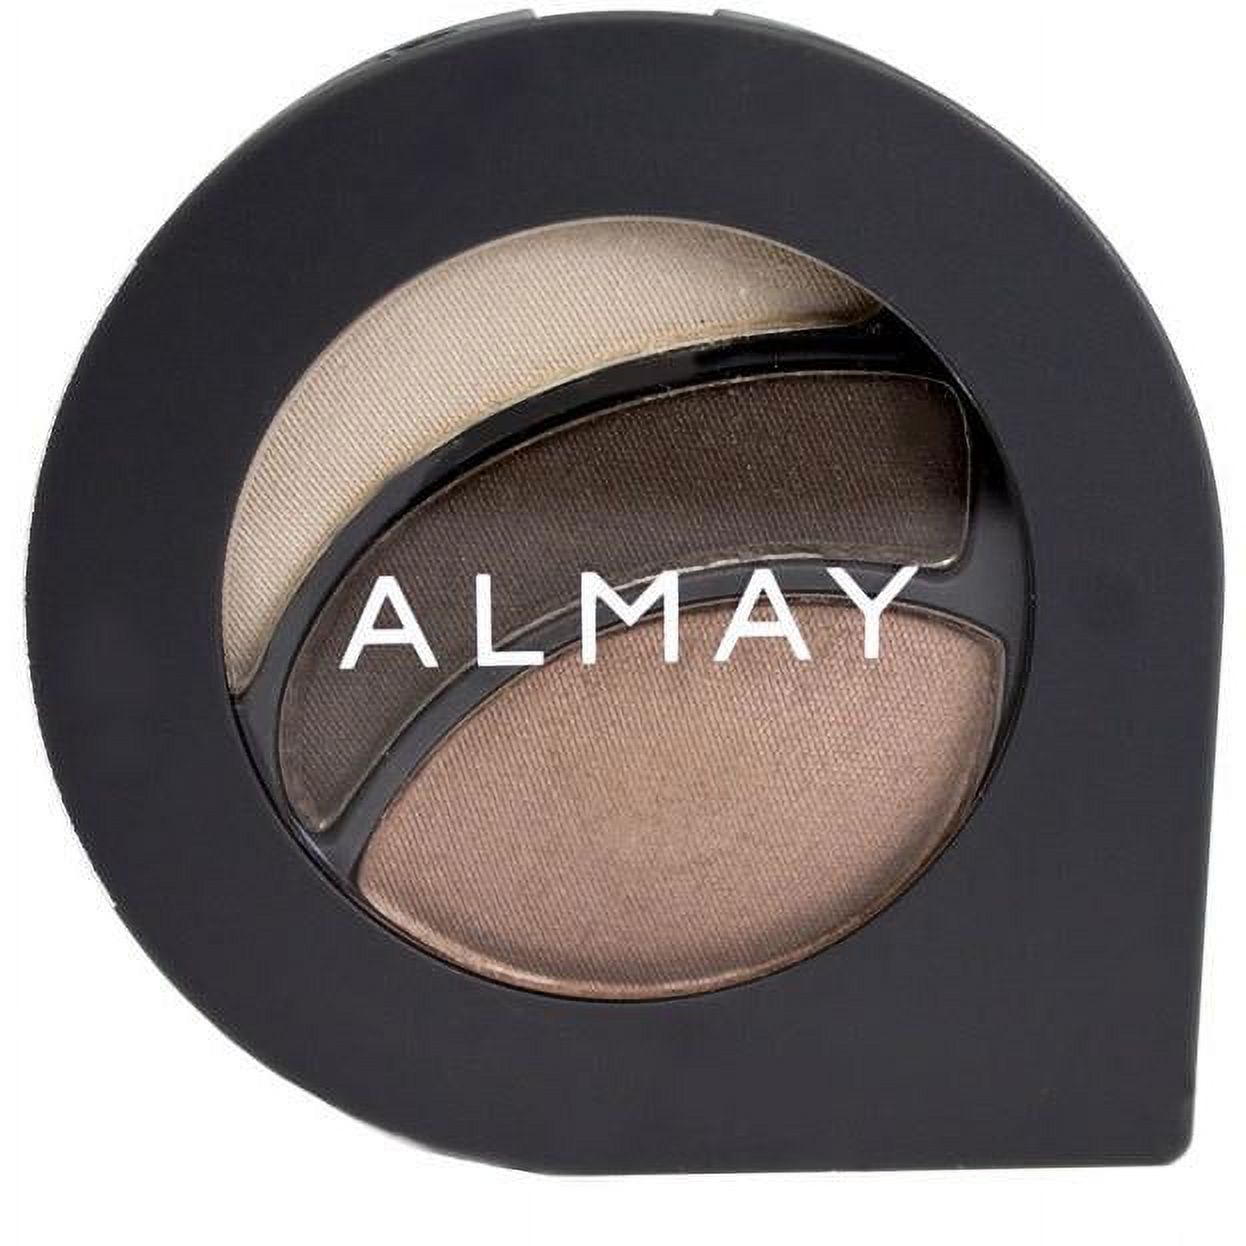 Almay Intense I-Color Everyday Neutrals All Day Wear Powder Eye Shadow, For Brown Eyes - image 1 of 6